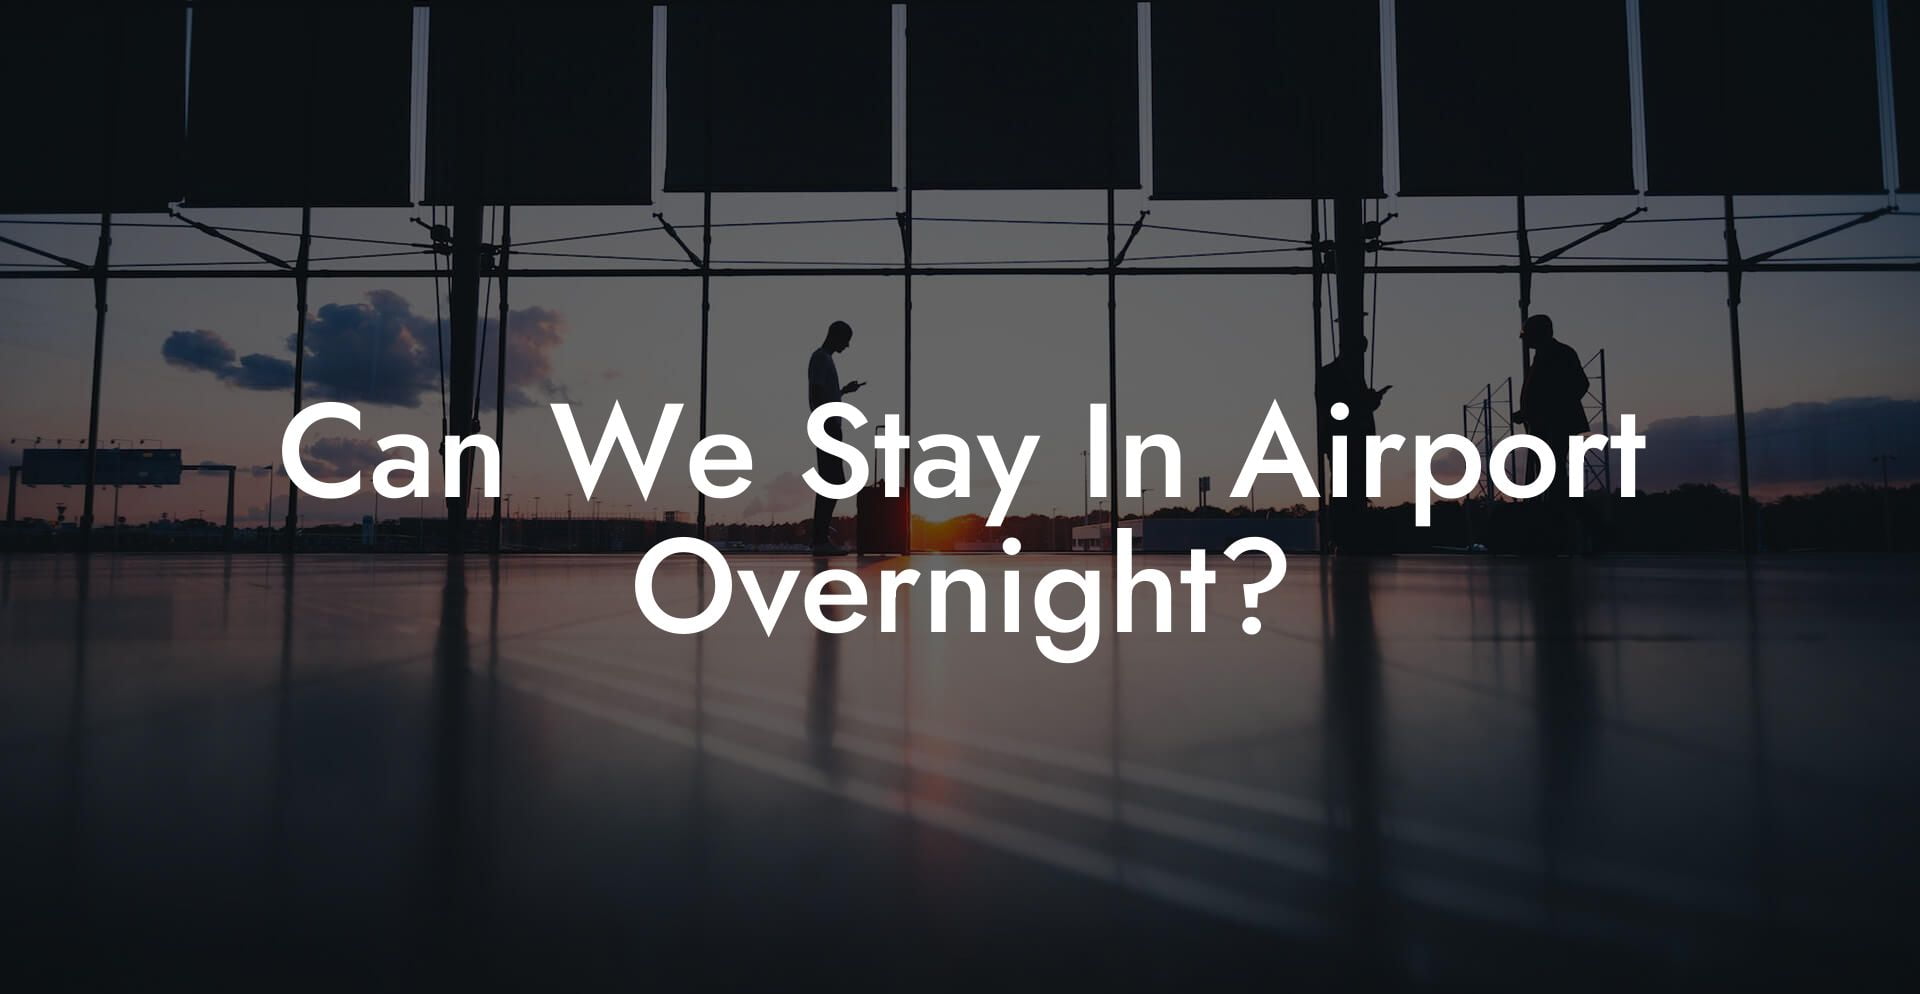 Can We Stay In Airport Overnight?